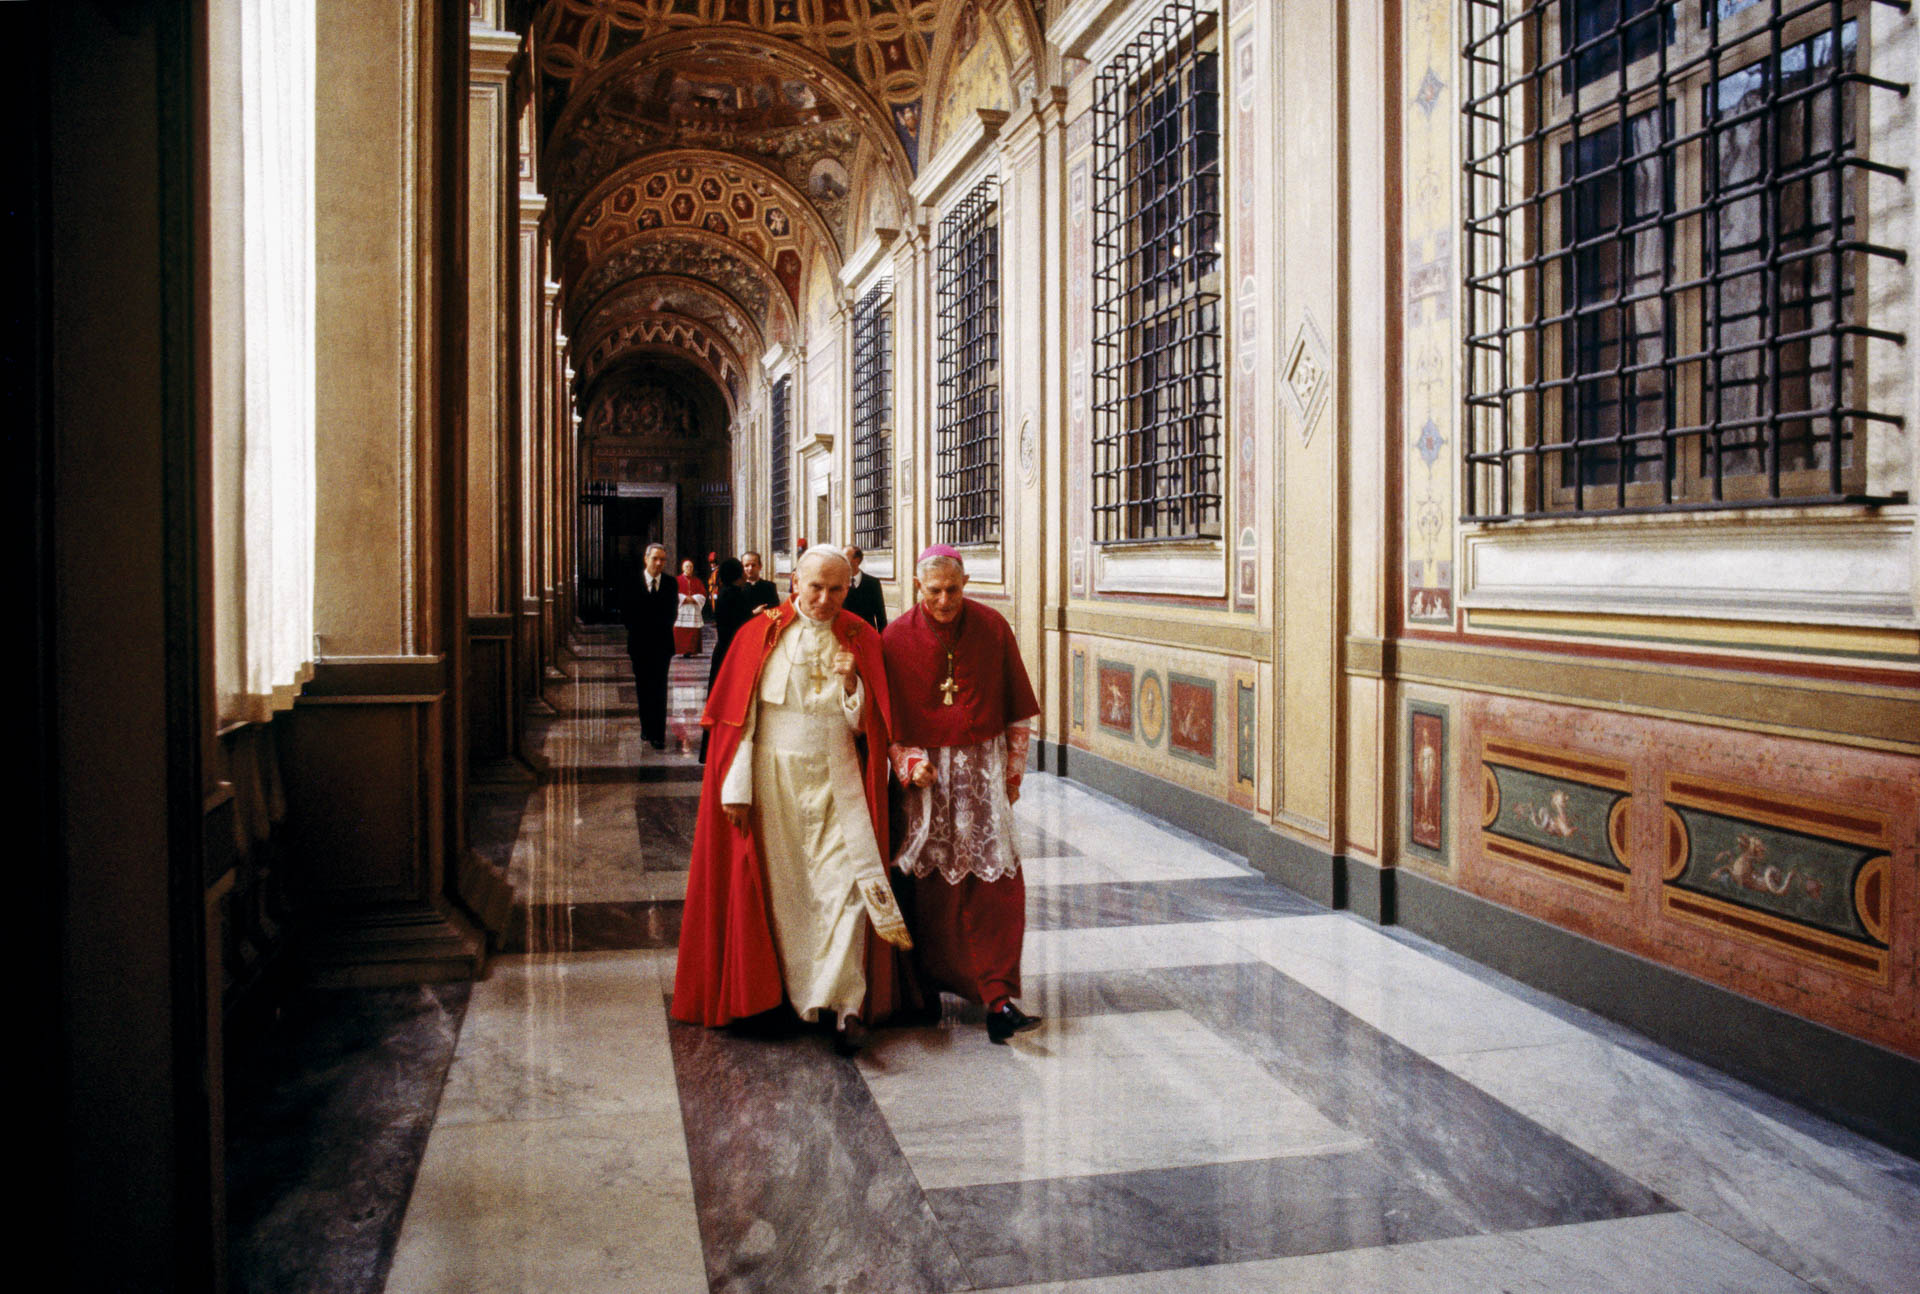  The Vatican - February 1986 A day in the life of the Pope John Paul II in the intimacy of the Vatican: going back to private apartment accompanied by Mons. Jacques Martin through the Raphael Loggia.&nbsp; 